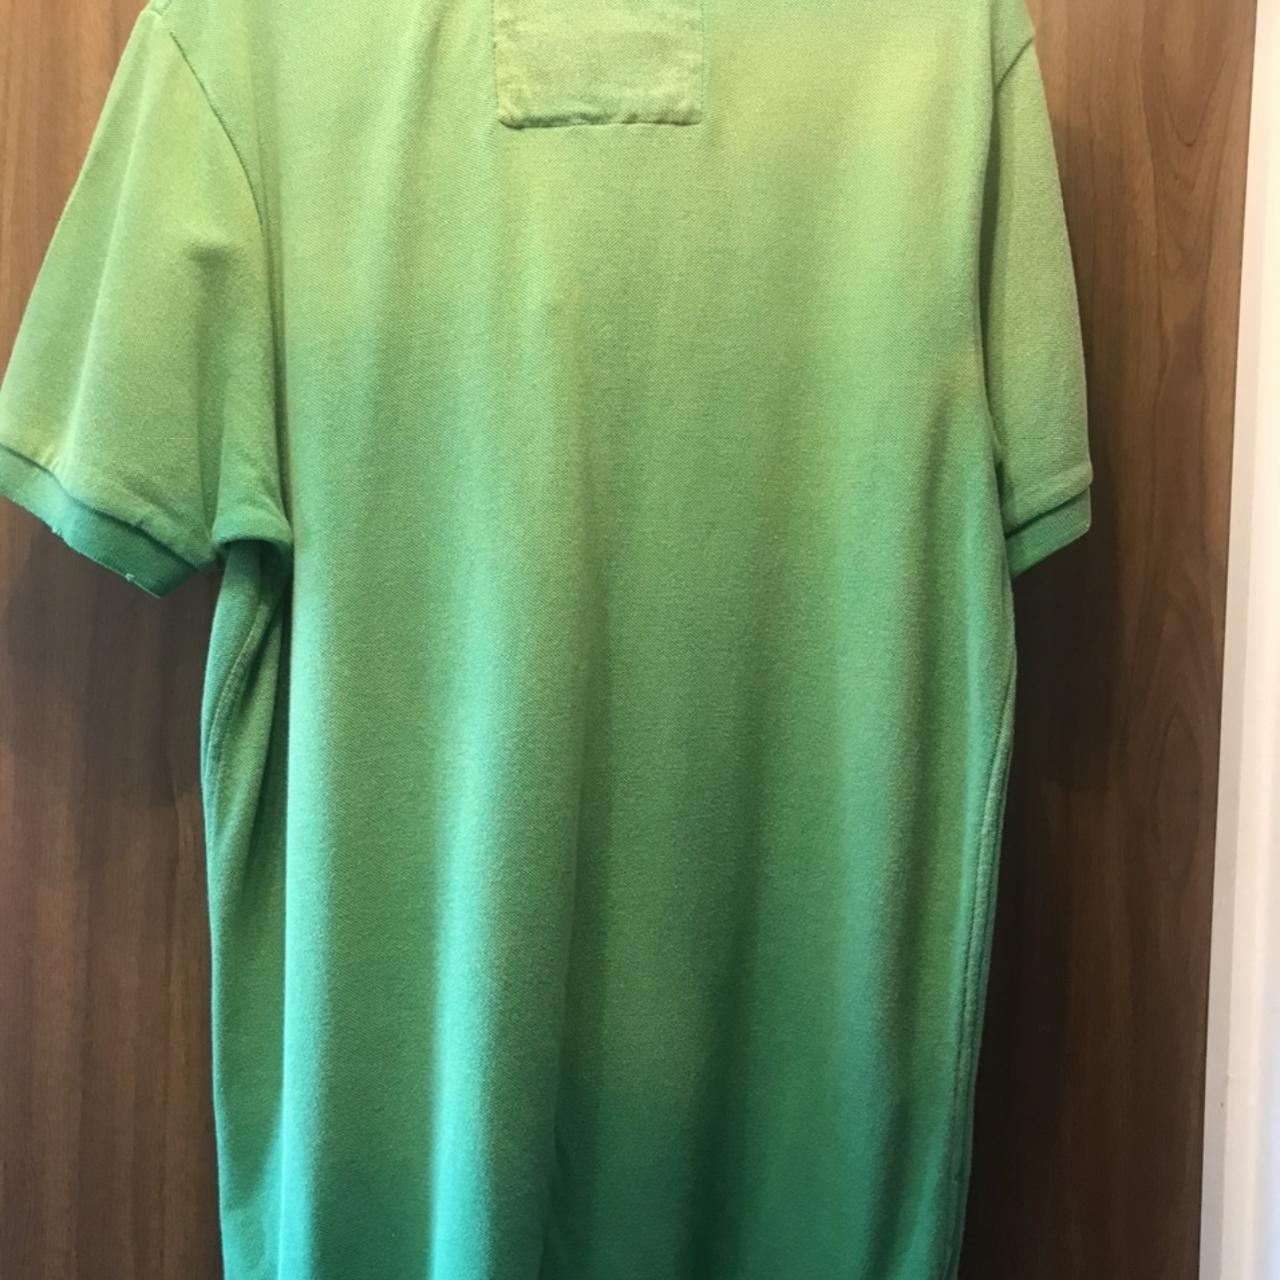 Abercrombie & Fitch Men's Green Polo-shirts | Depop